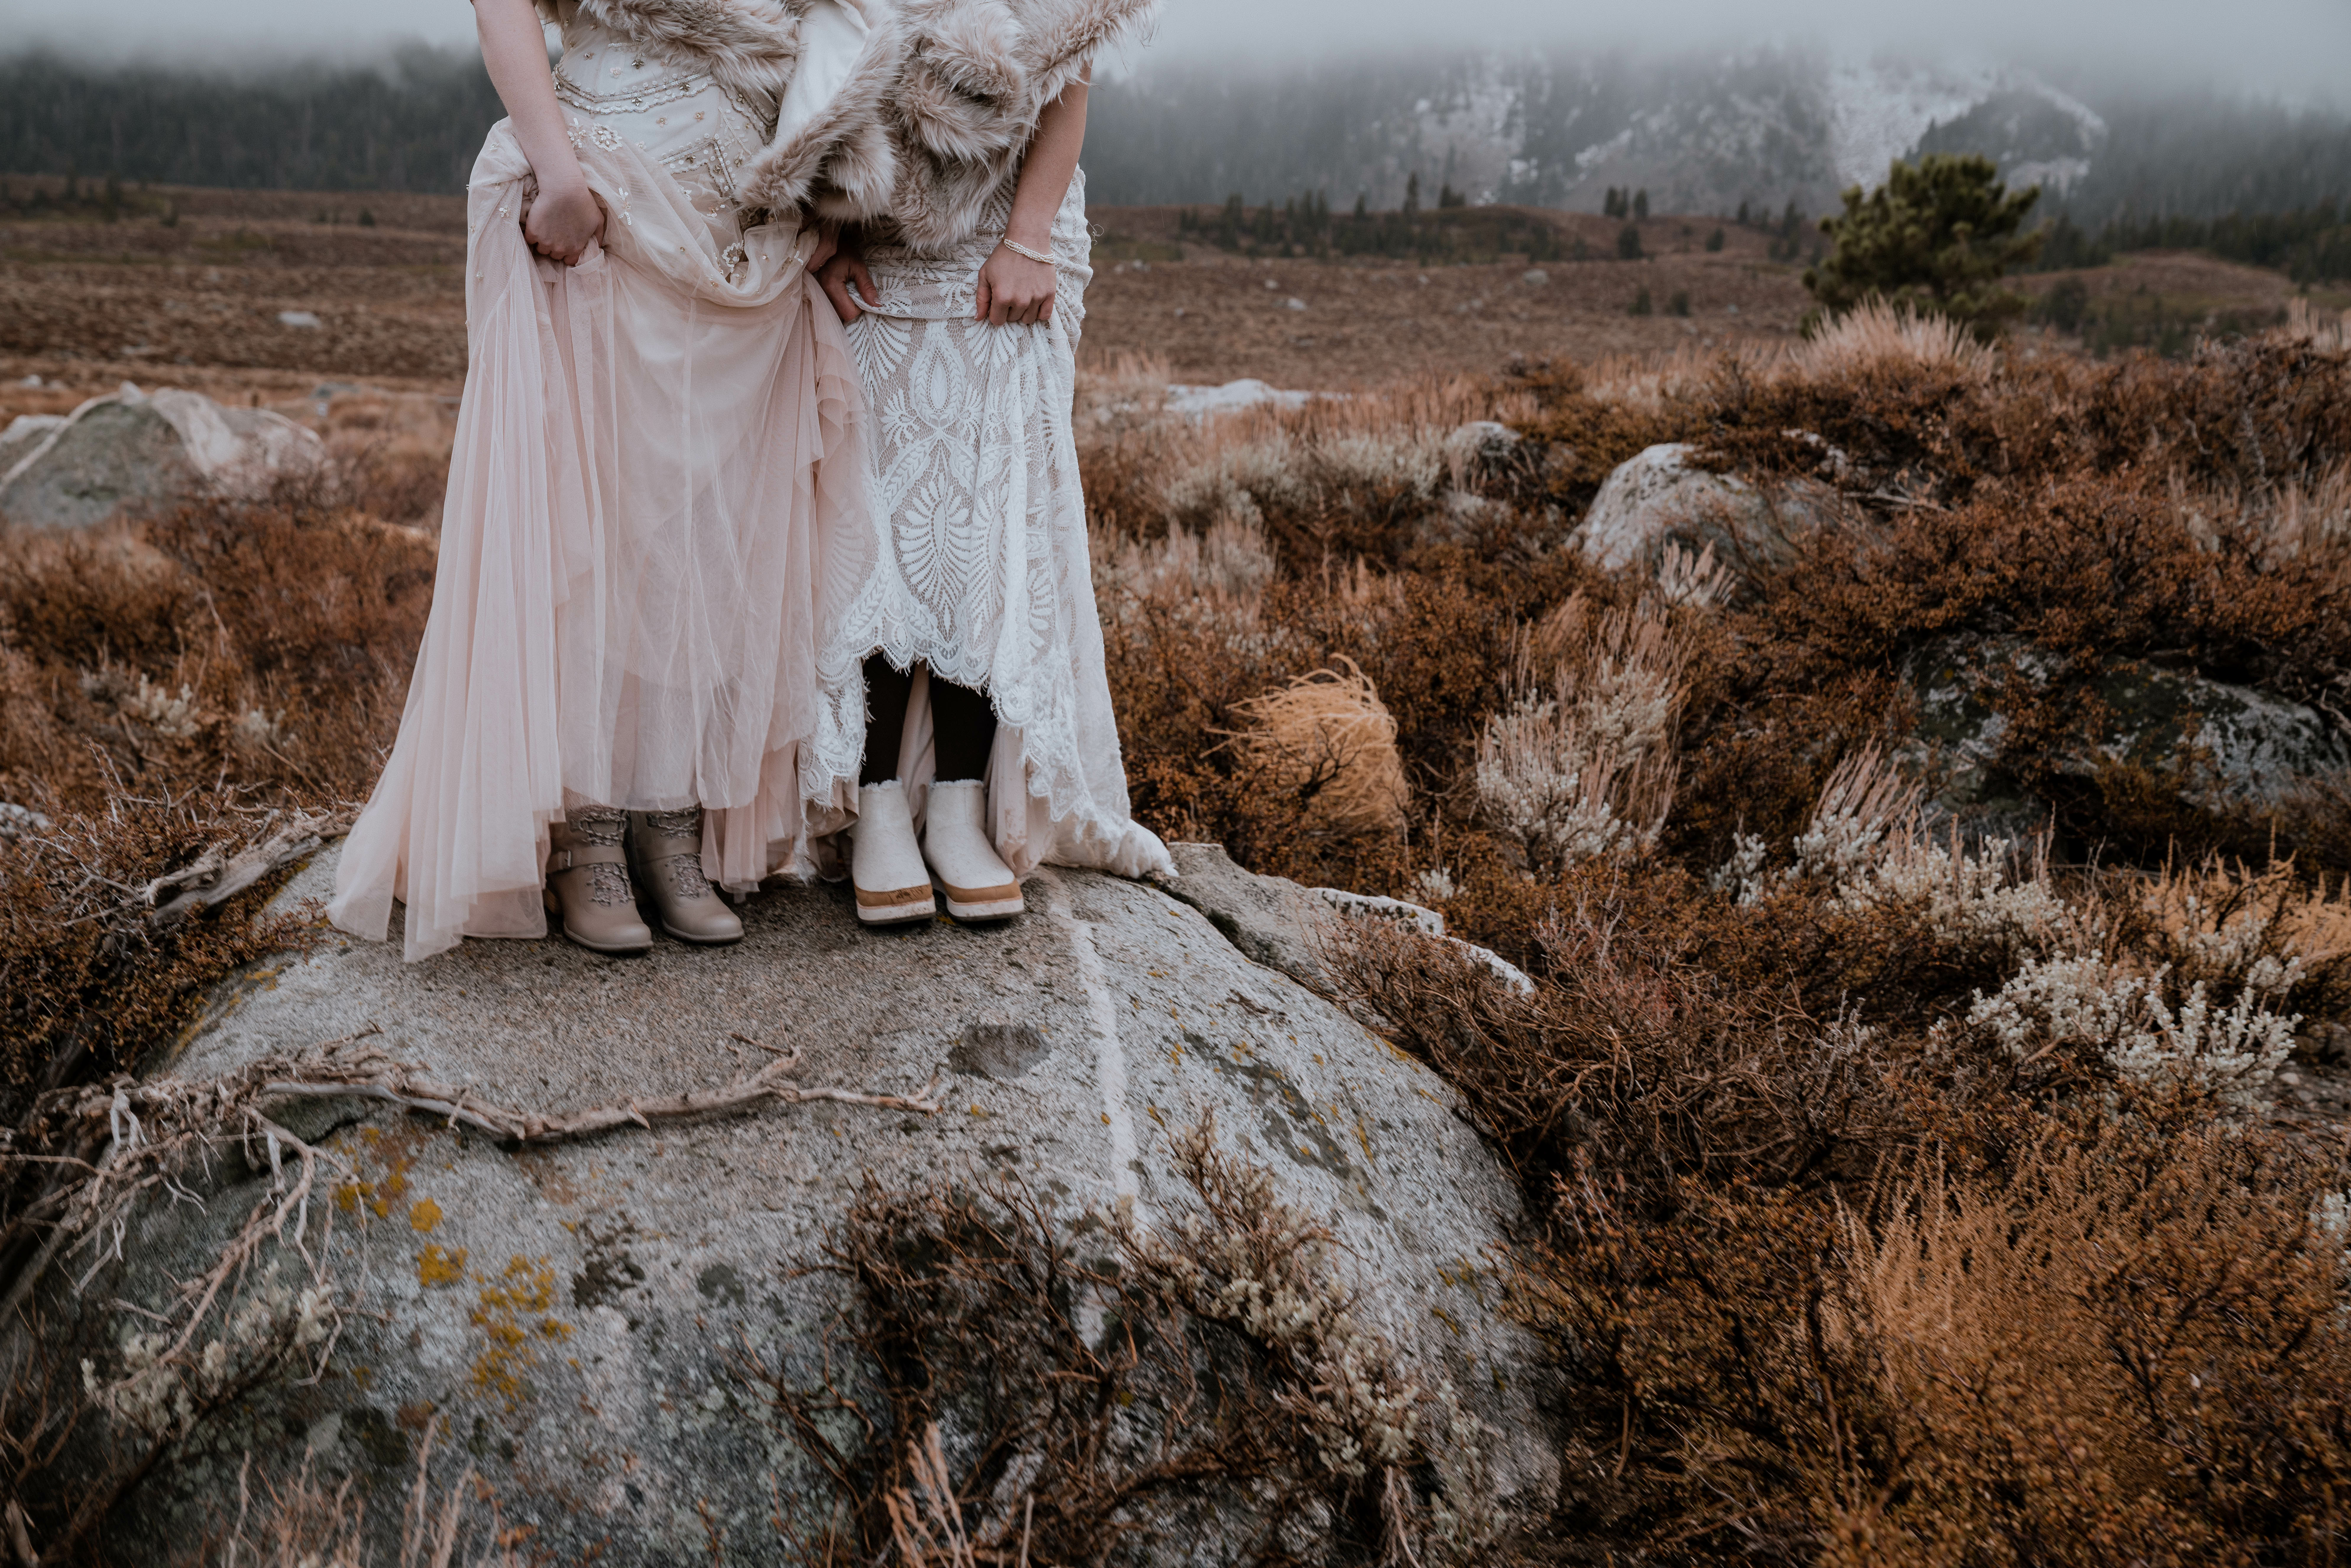 Two women in winter wedding dresses wearing boots for a winter wedding